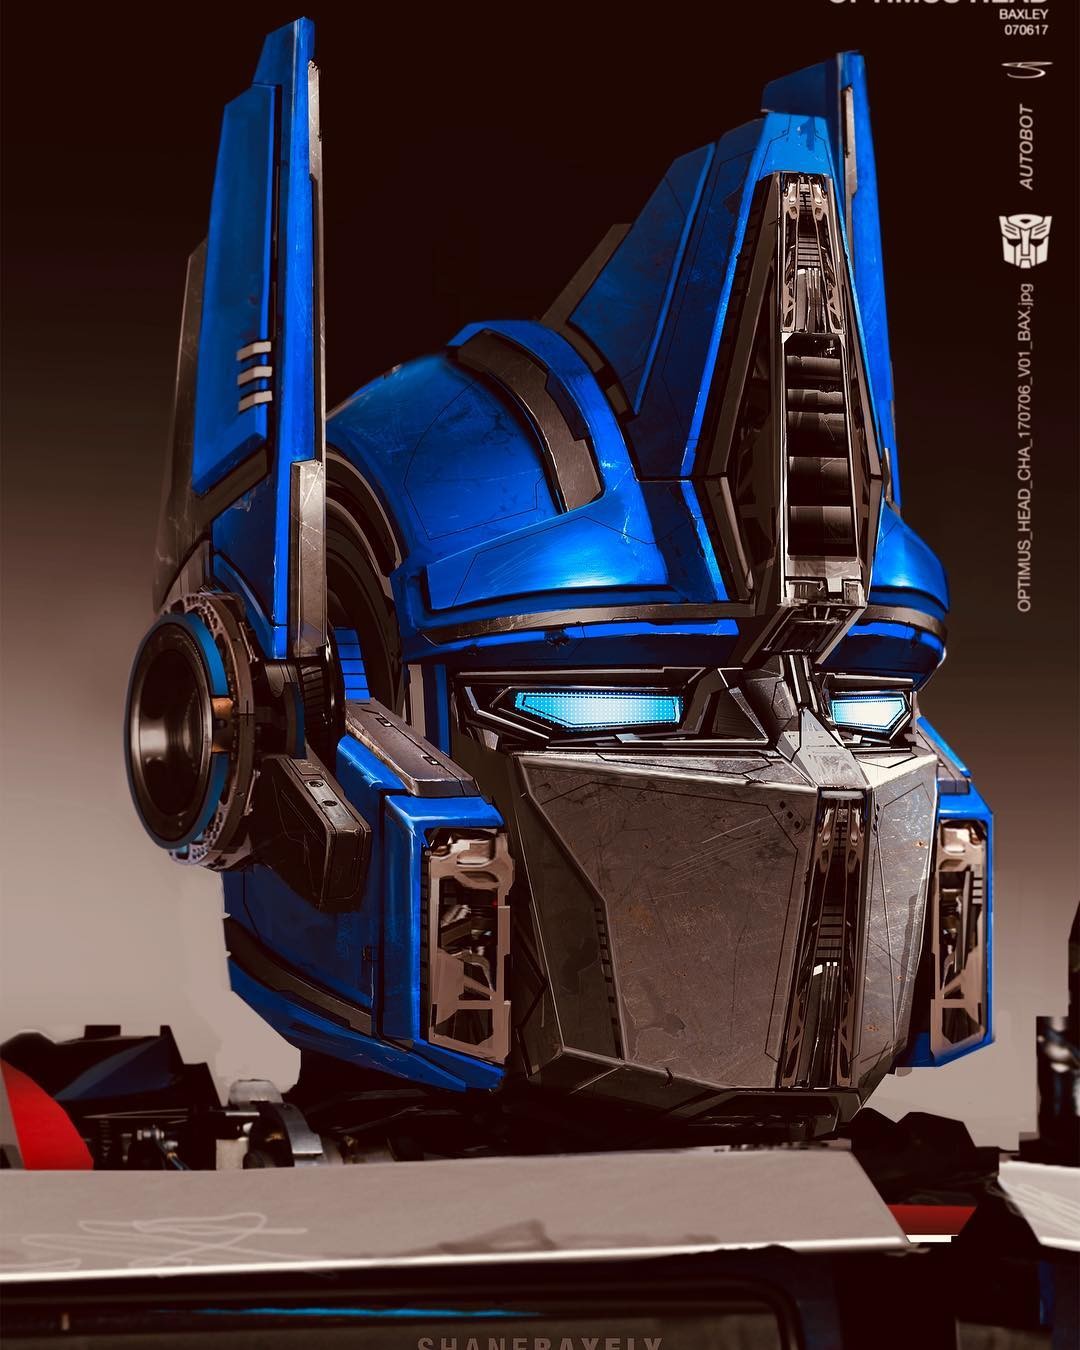 New Optimus Prime Concept Art from Bumblebee Film - Transformers